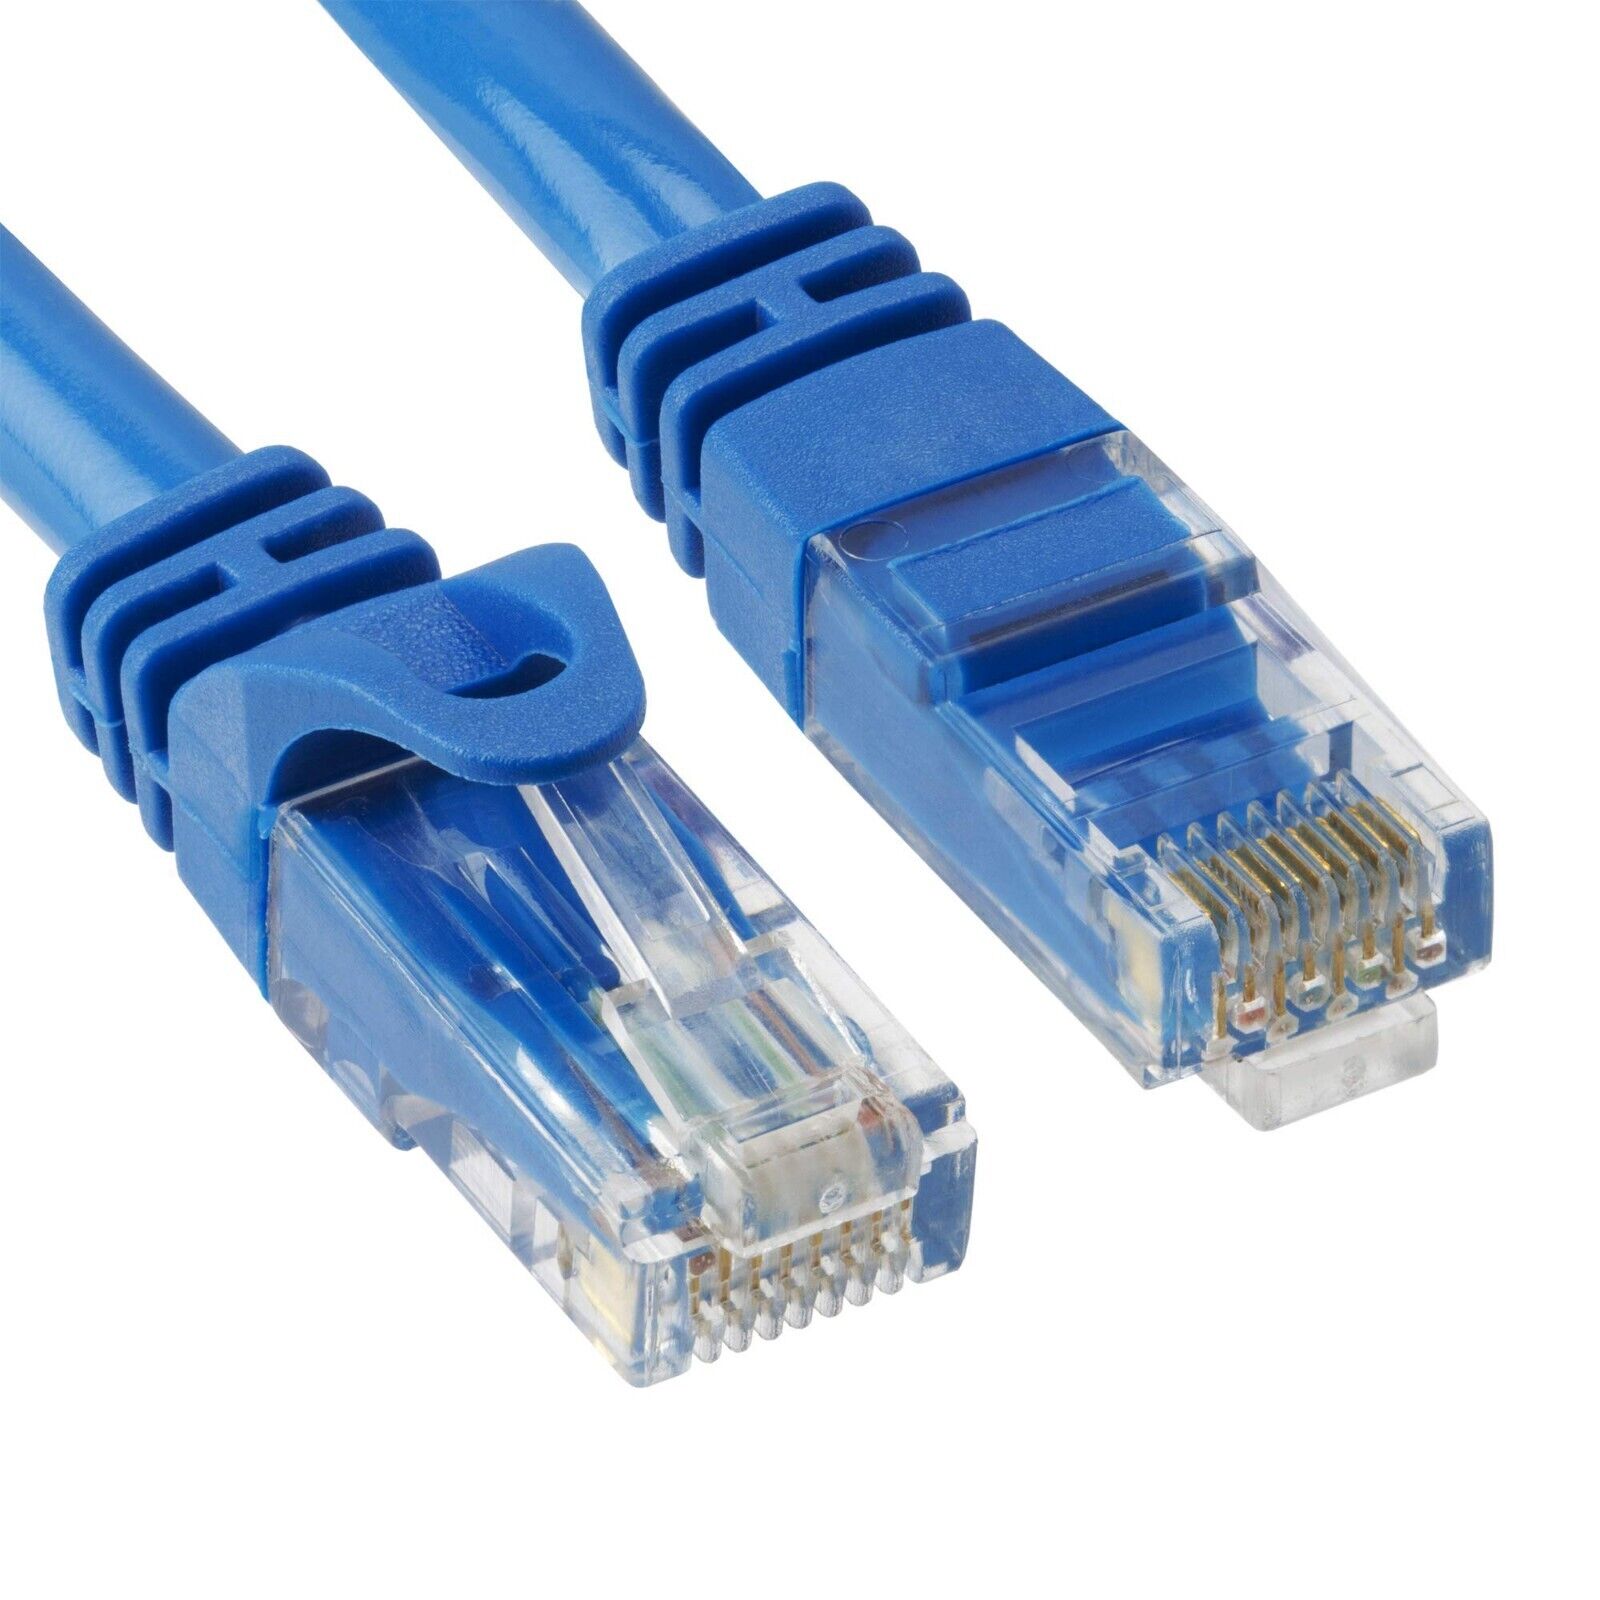 New Customizable Ethernet Cables. Blue. Size can very from 10ft to 200ft